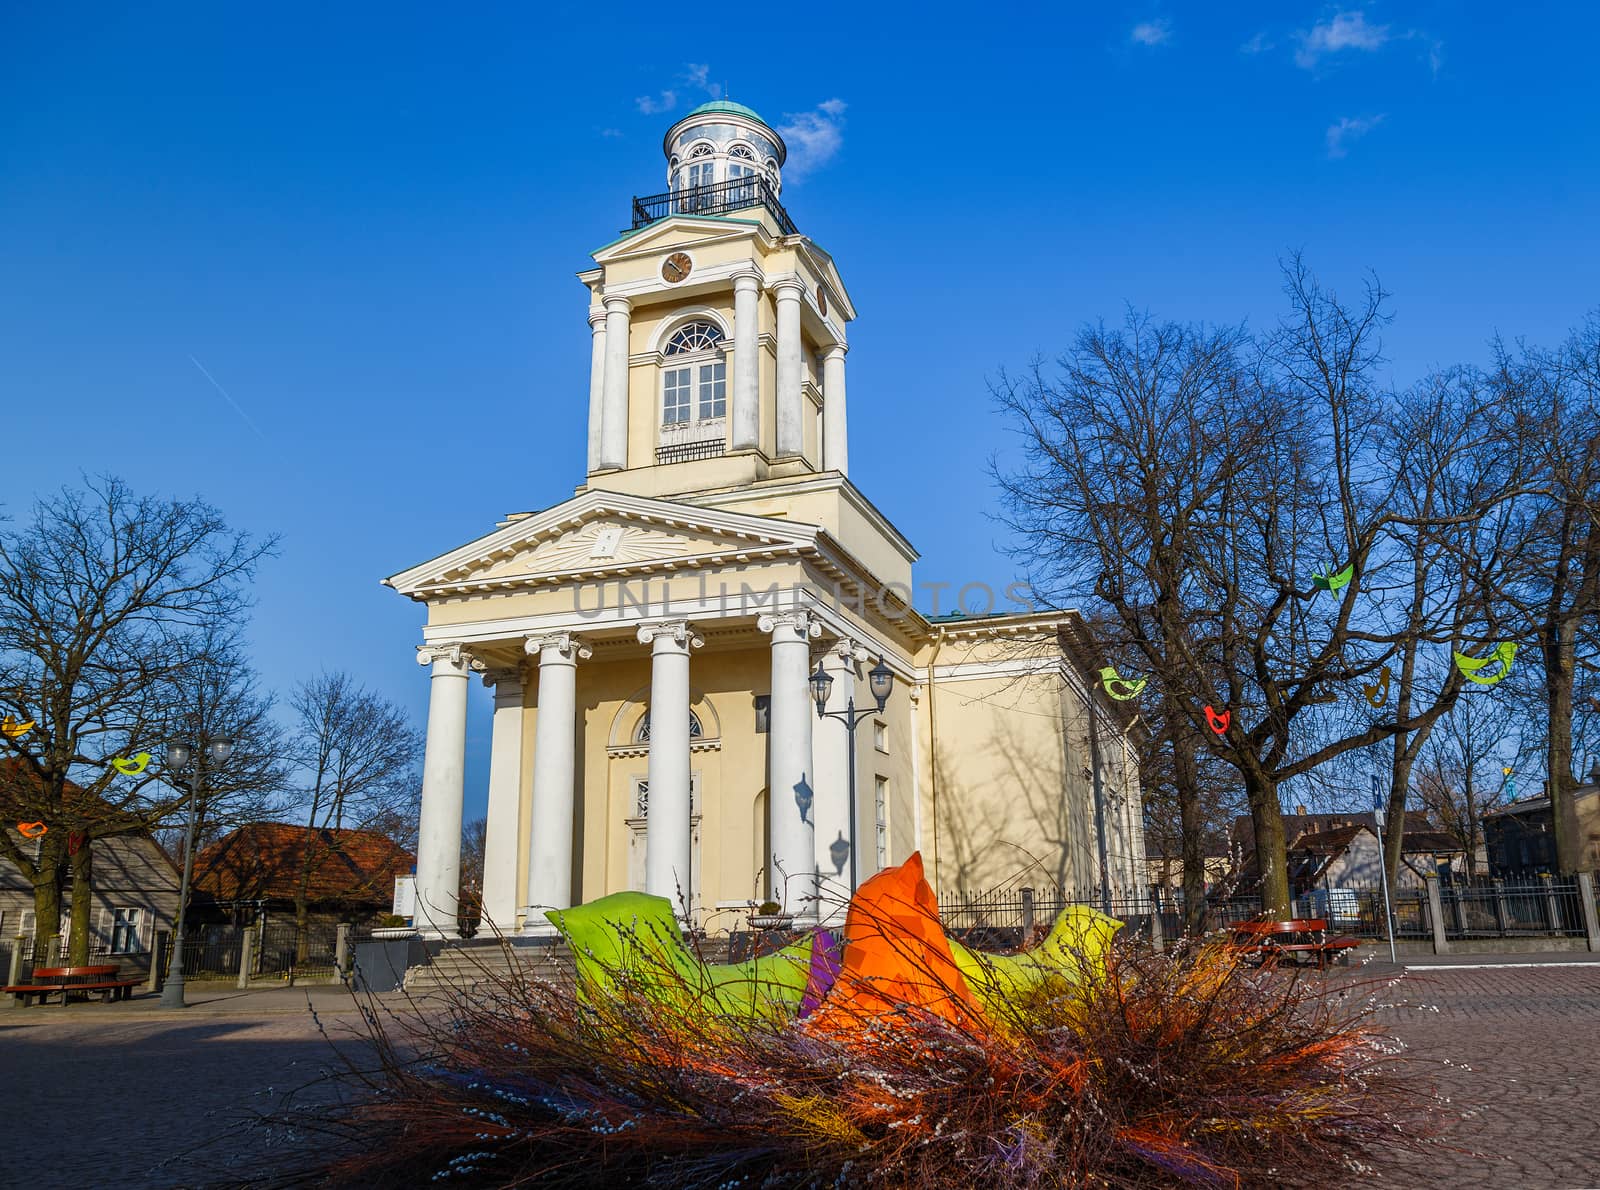 Lutheran Church in the Town Hall Square,Ventspils,Latvia